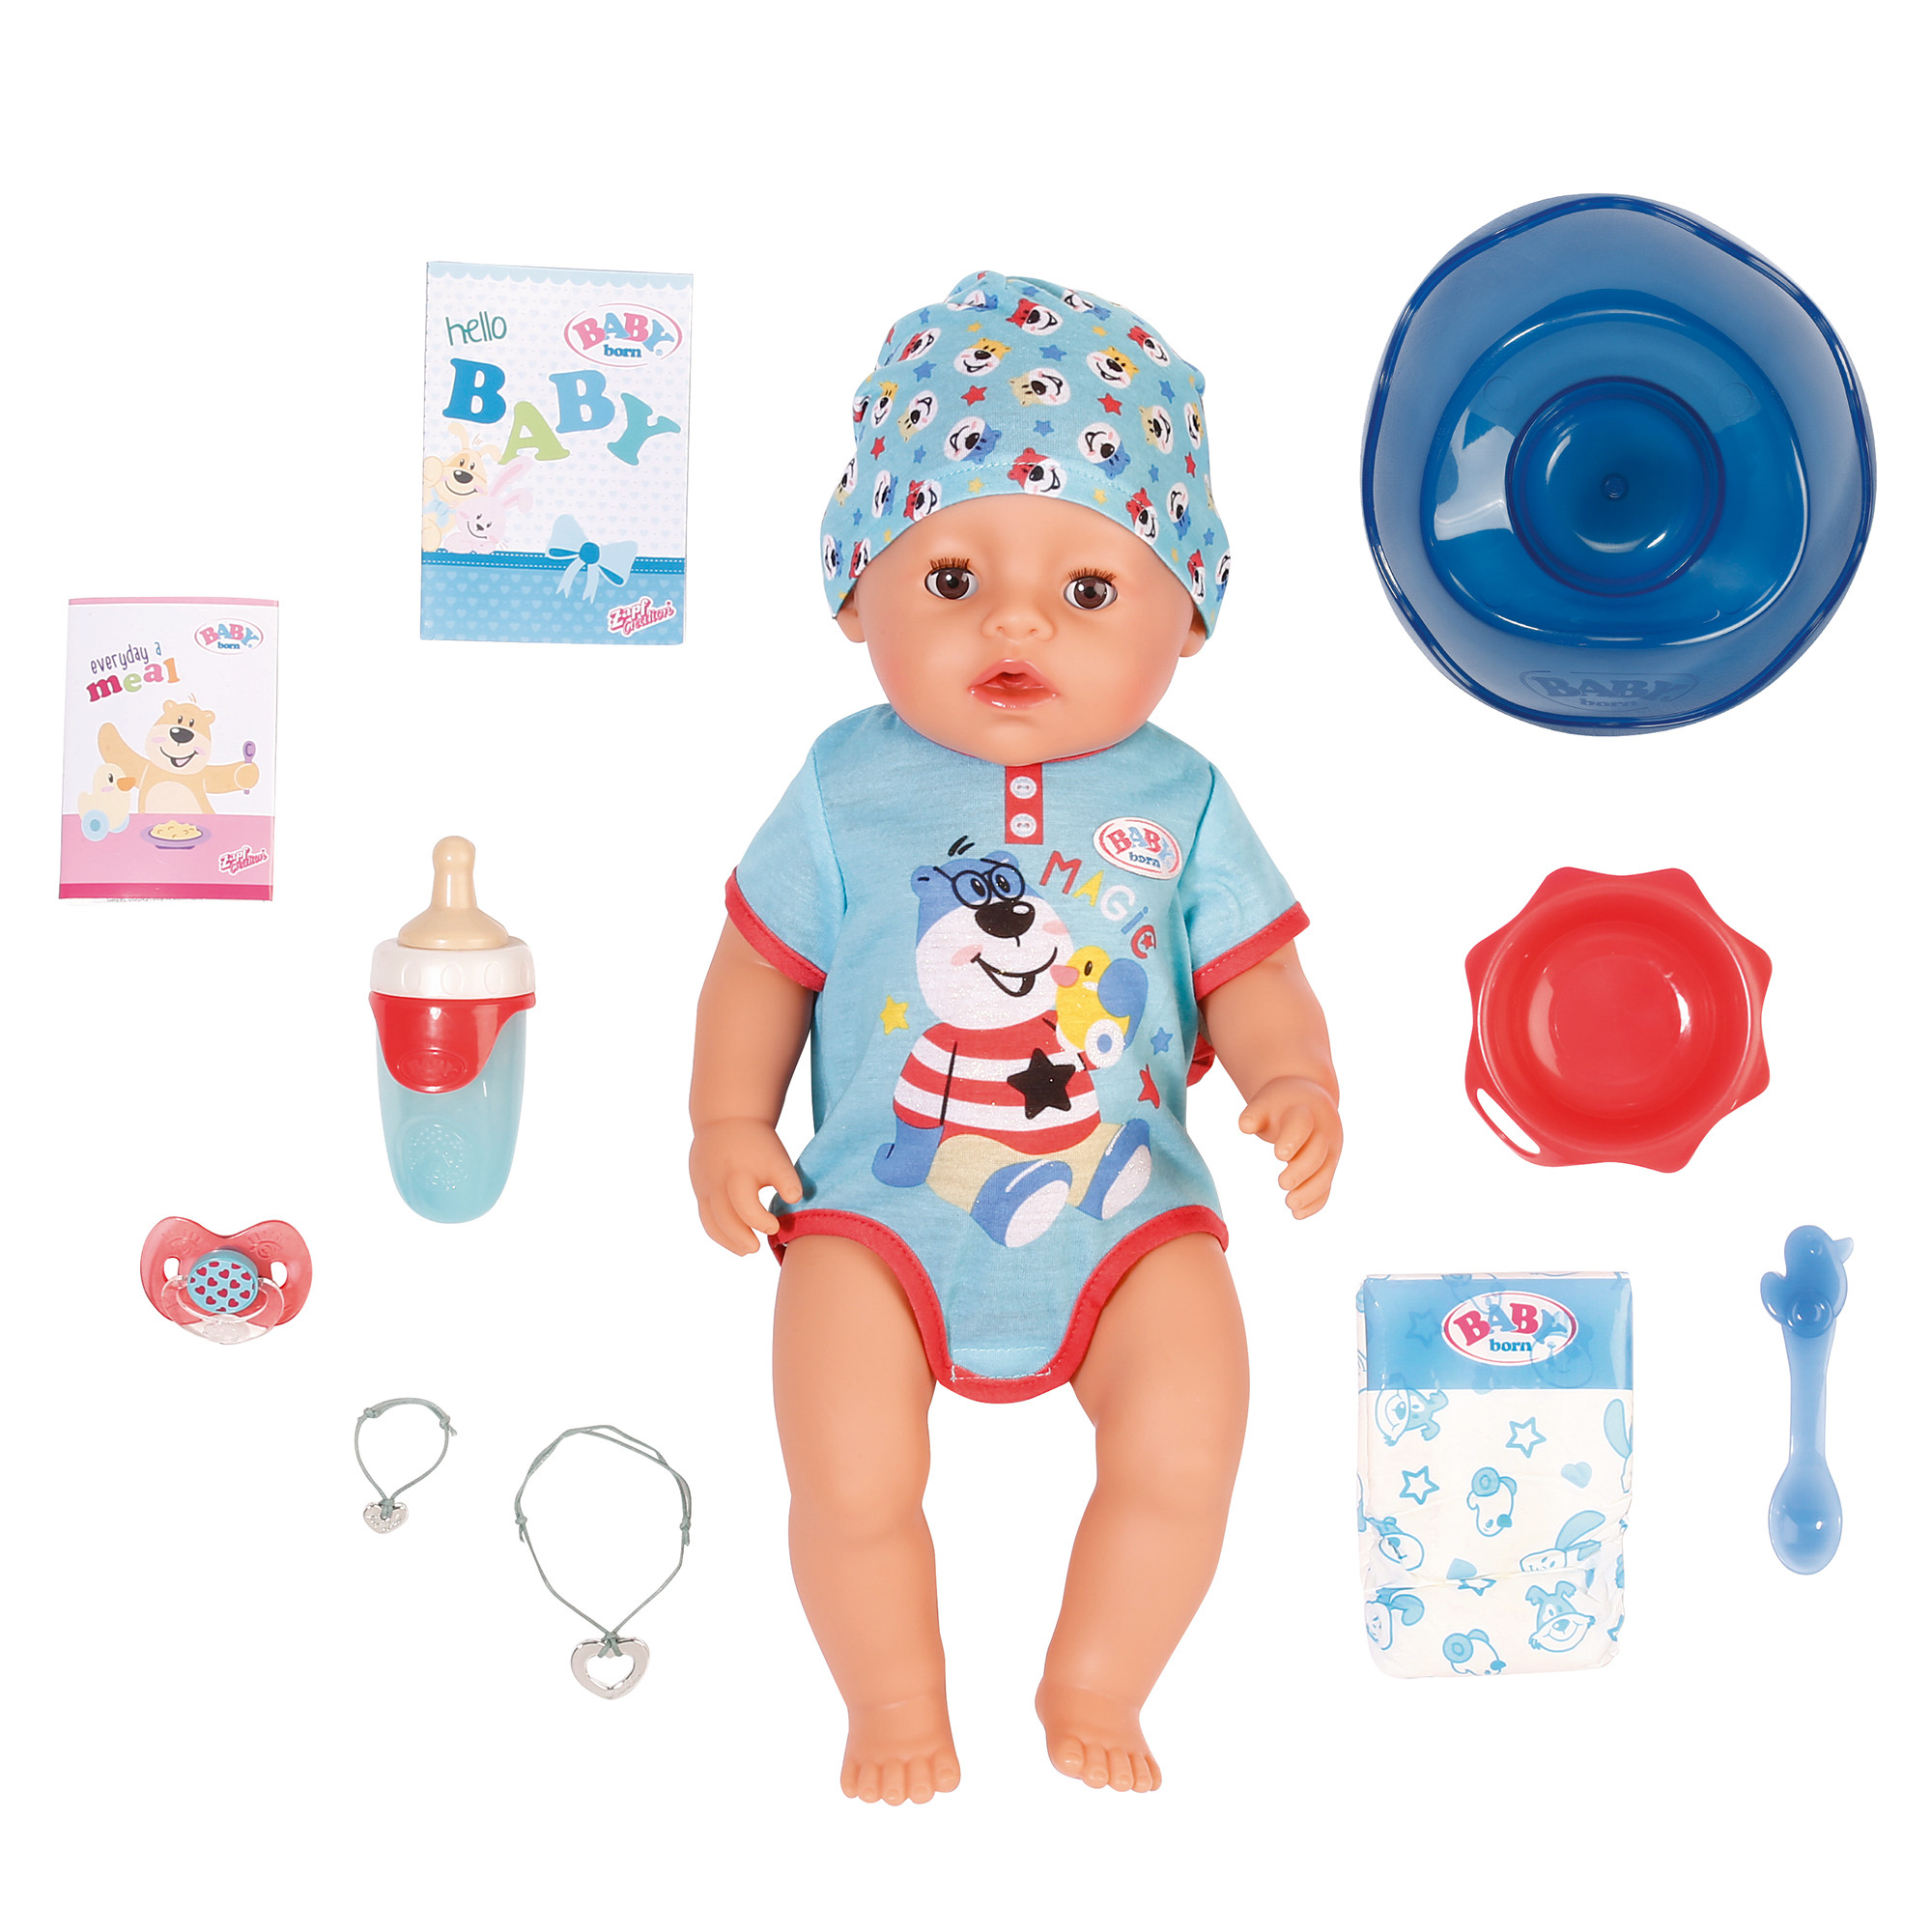 Dynamics Shaded Skrive ud BABY Born Magic Boy 43cm Baby Doll and Accessories at Toys R Us UK